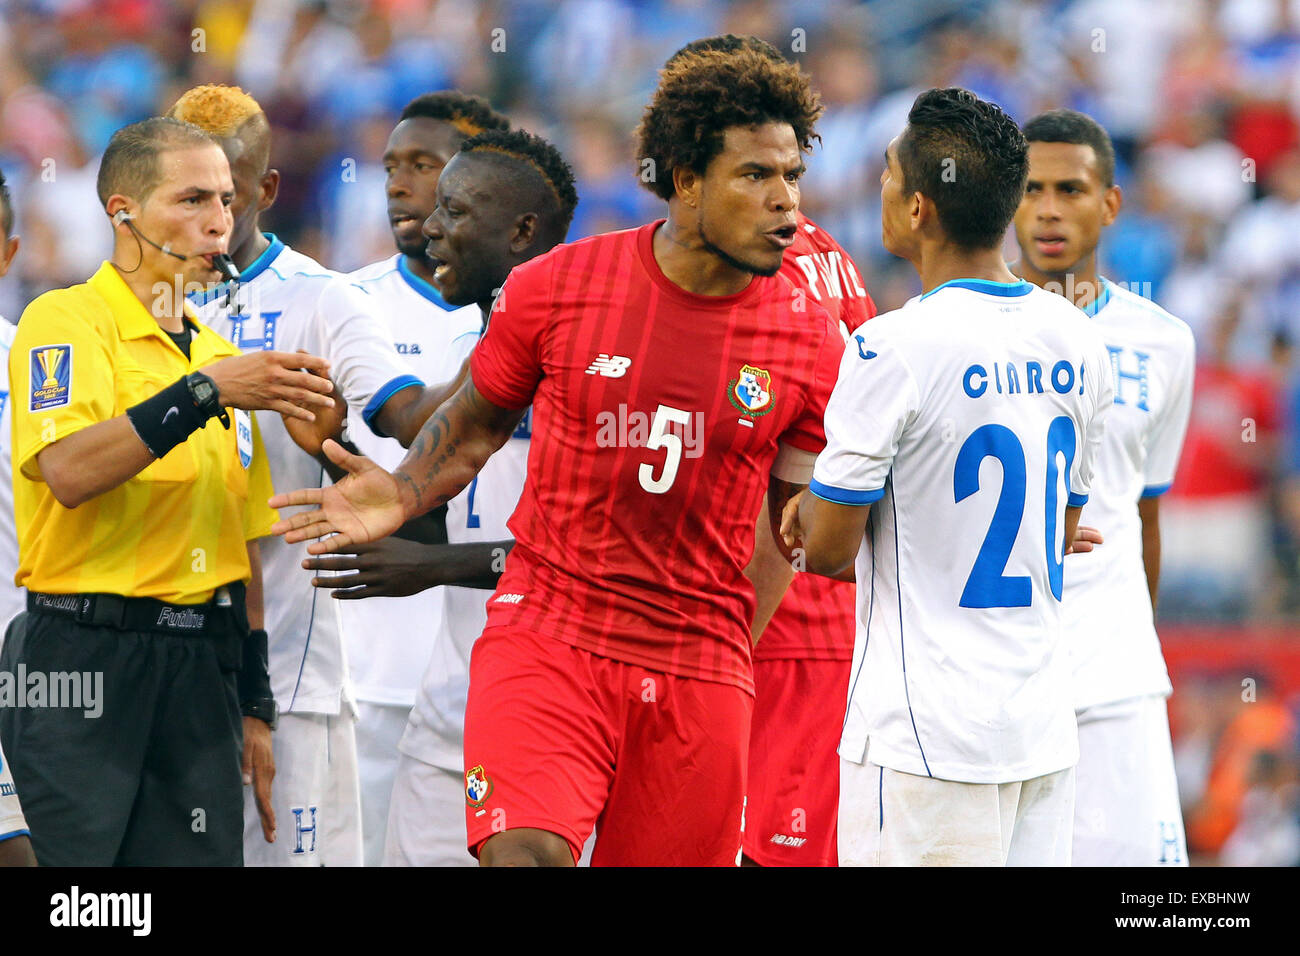 Foxborough, MA, USA. 10th July, 2015. Panama defender Roman Torres (5) exchanges words with Honduras midfielder Jorge Claros (20) during the second half of the CONCACAF Gold Cup match between Panama and Honduras at Gillette Stadium. The match ended in a 1-1 tie. Anthony Nesmith/Cal Sport Media Credit:  Cal Sport Media/Alamy Live News Stock Photo